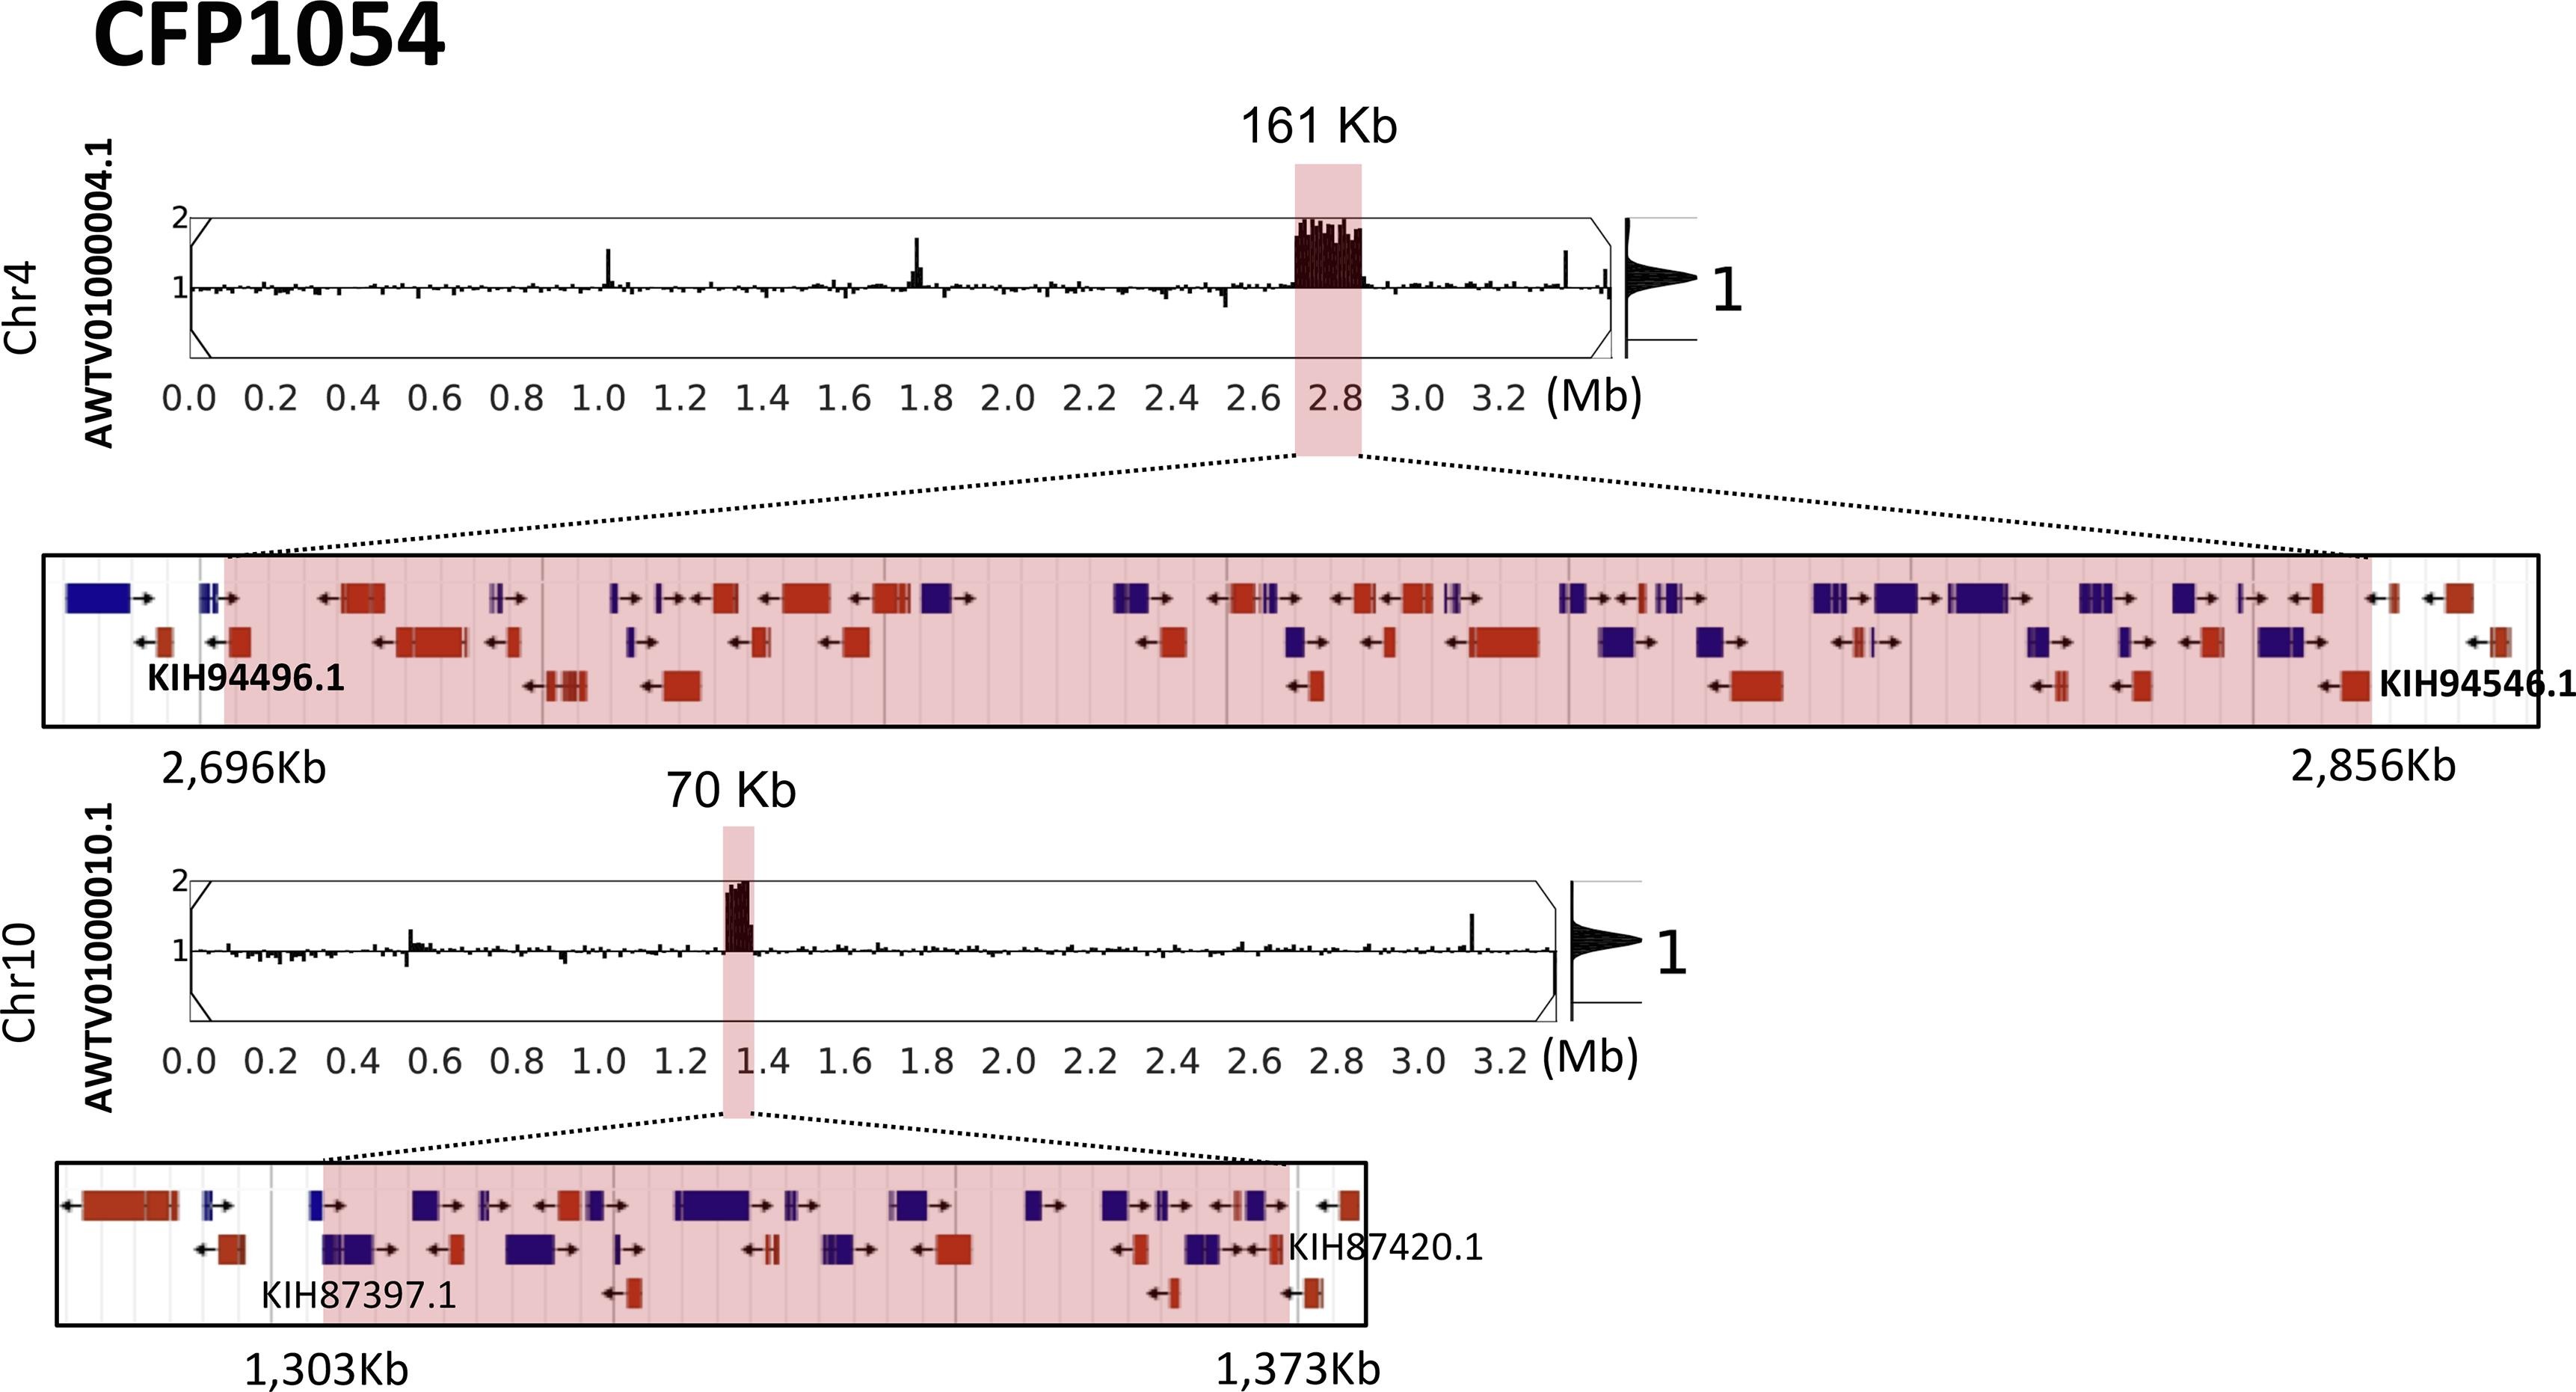 Single nucleotide polymorphisms and chromosomal copy number variation may impact the <i>Sporothrix brasiliensis</i> antifungal susceptibility and sporotrichosis clinical outcomes.